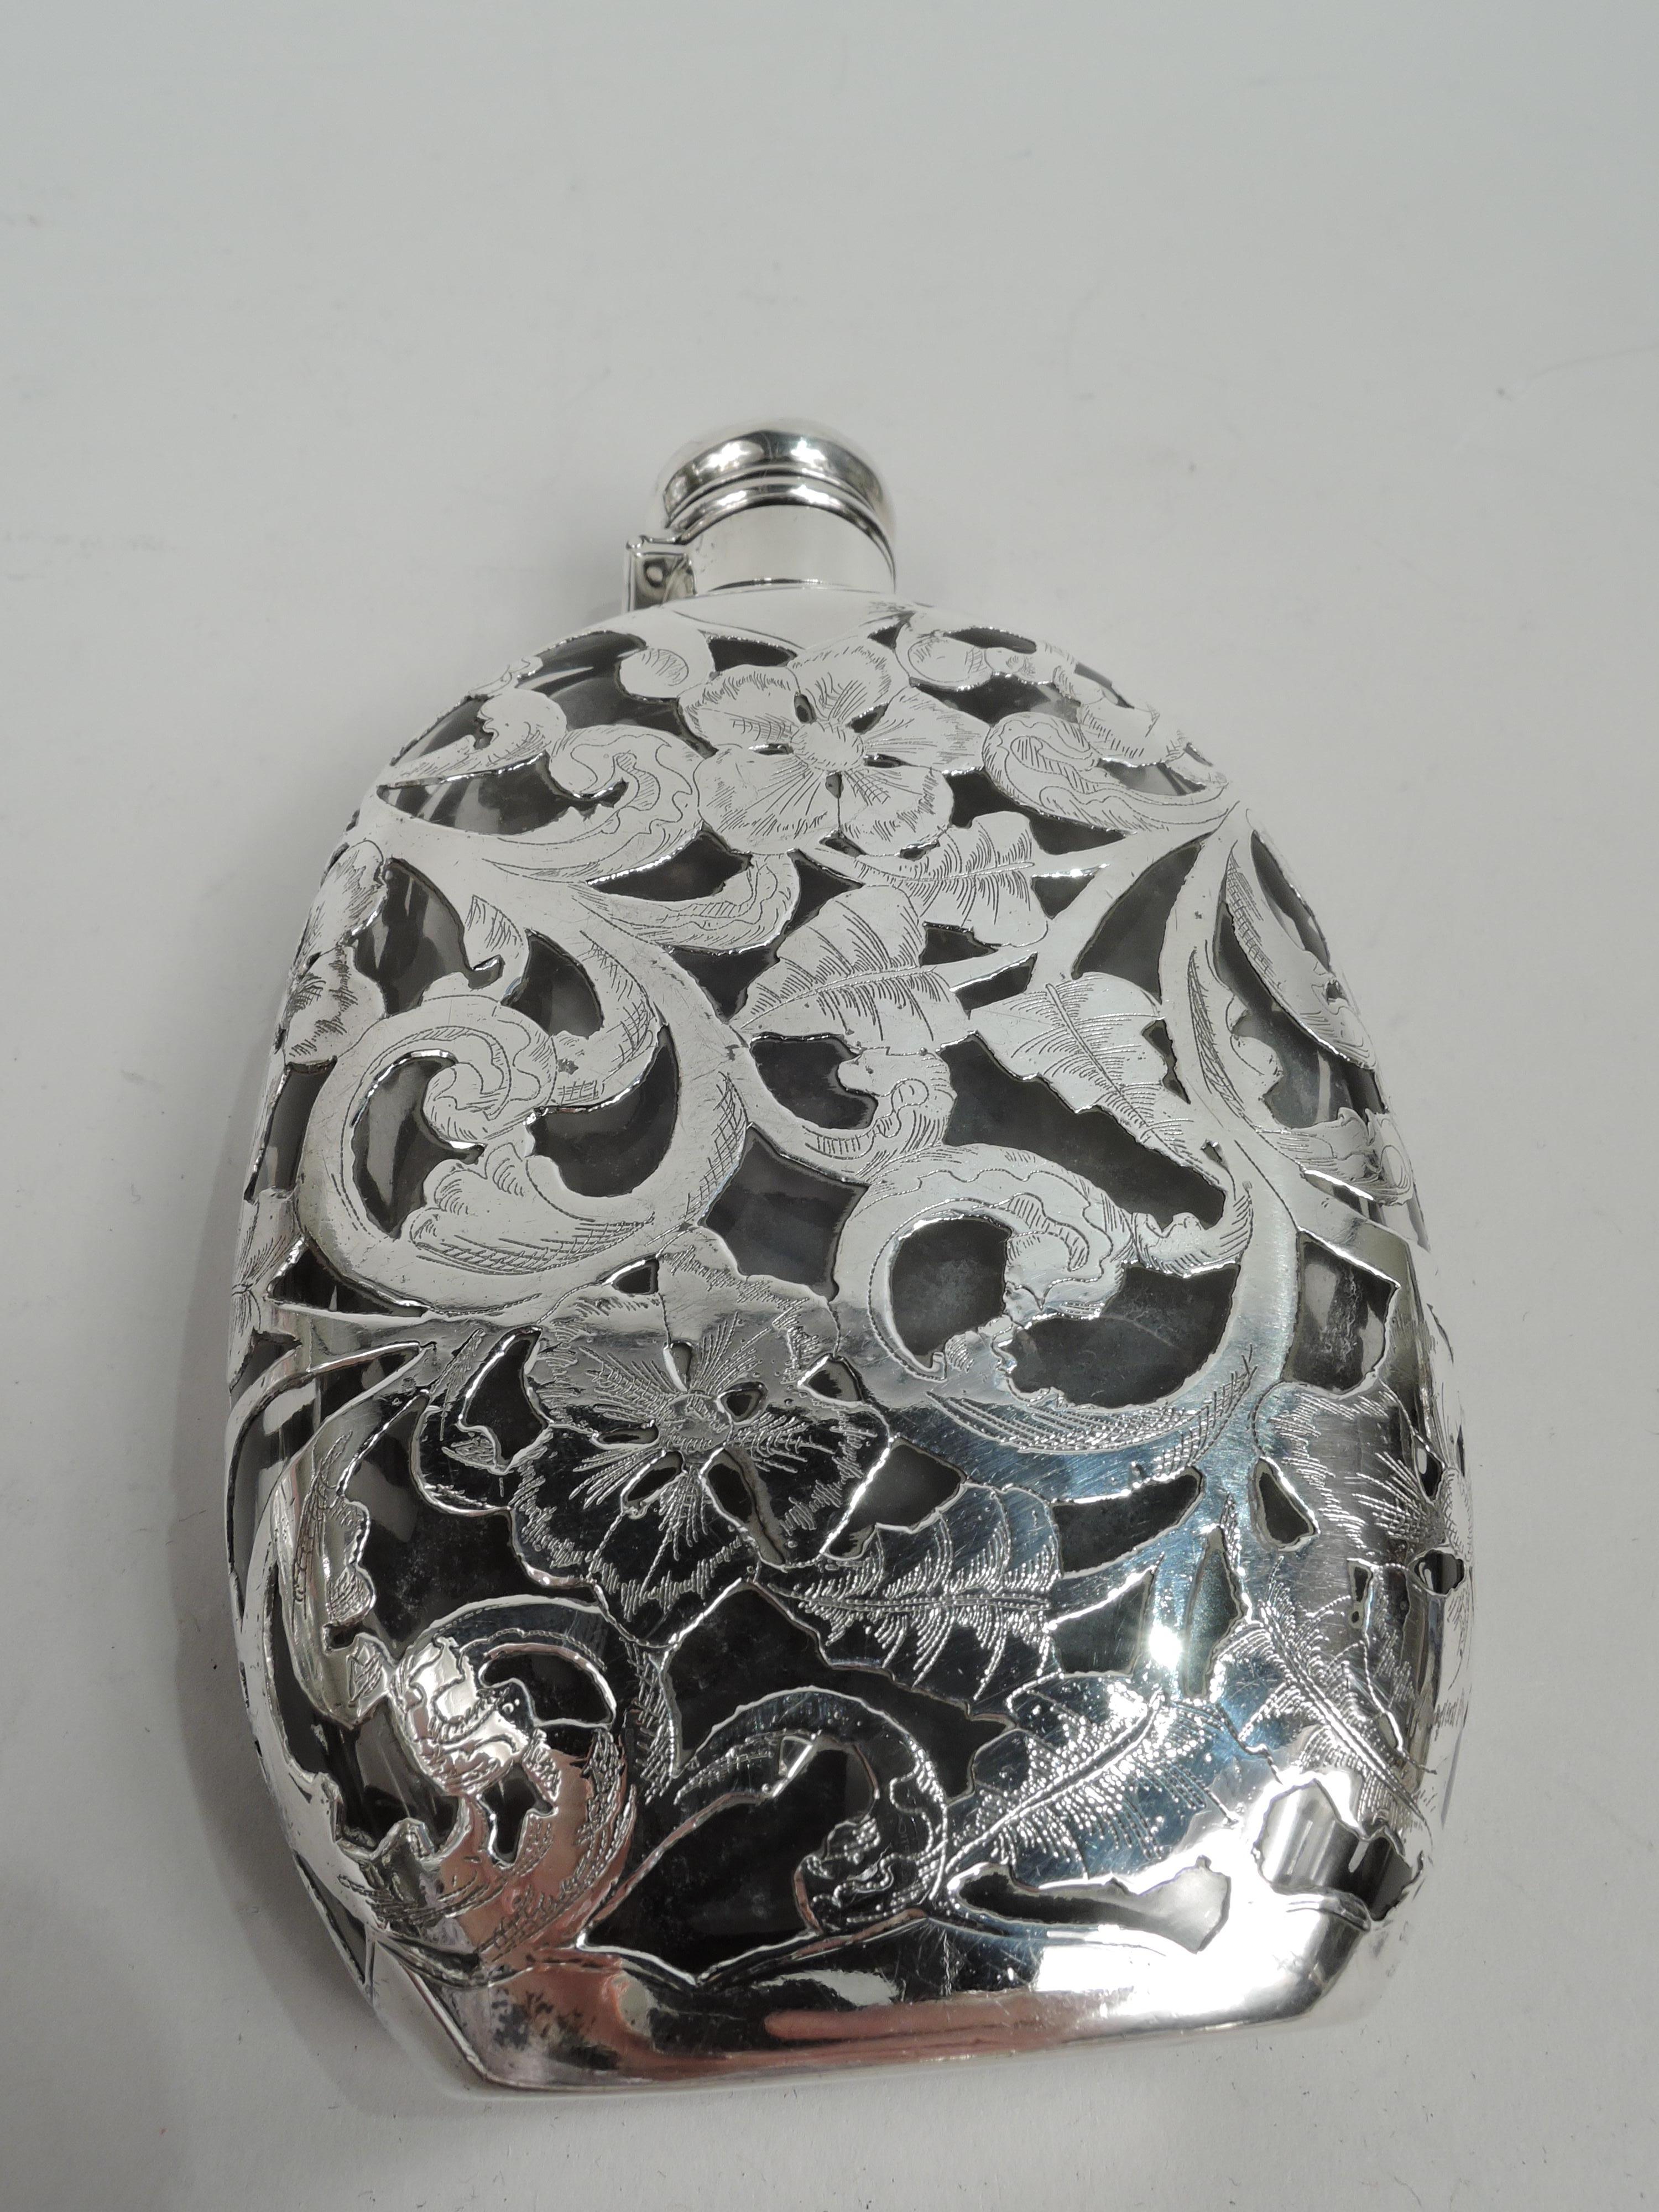 Turn-of-the-century American Art Nouveau glass flask with engraved silver overlay. Flat front and concave back; sides curved and bottom flat. Short neck in silver collar and hinged and cork-lined cover. Overlay in form of dense leafing scrollwork